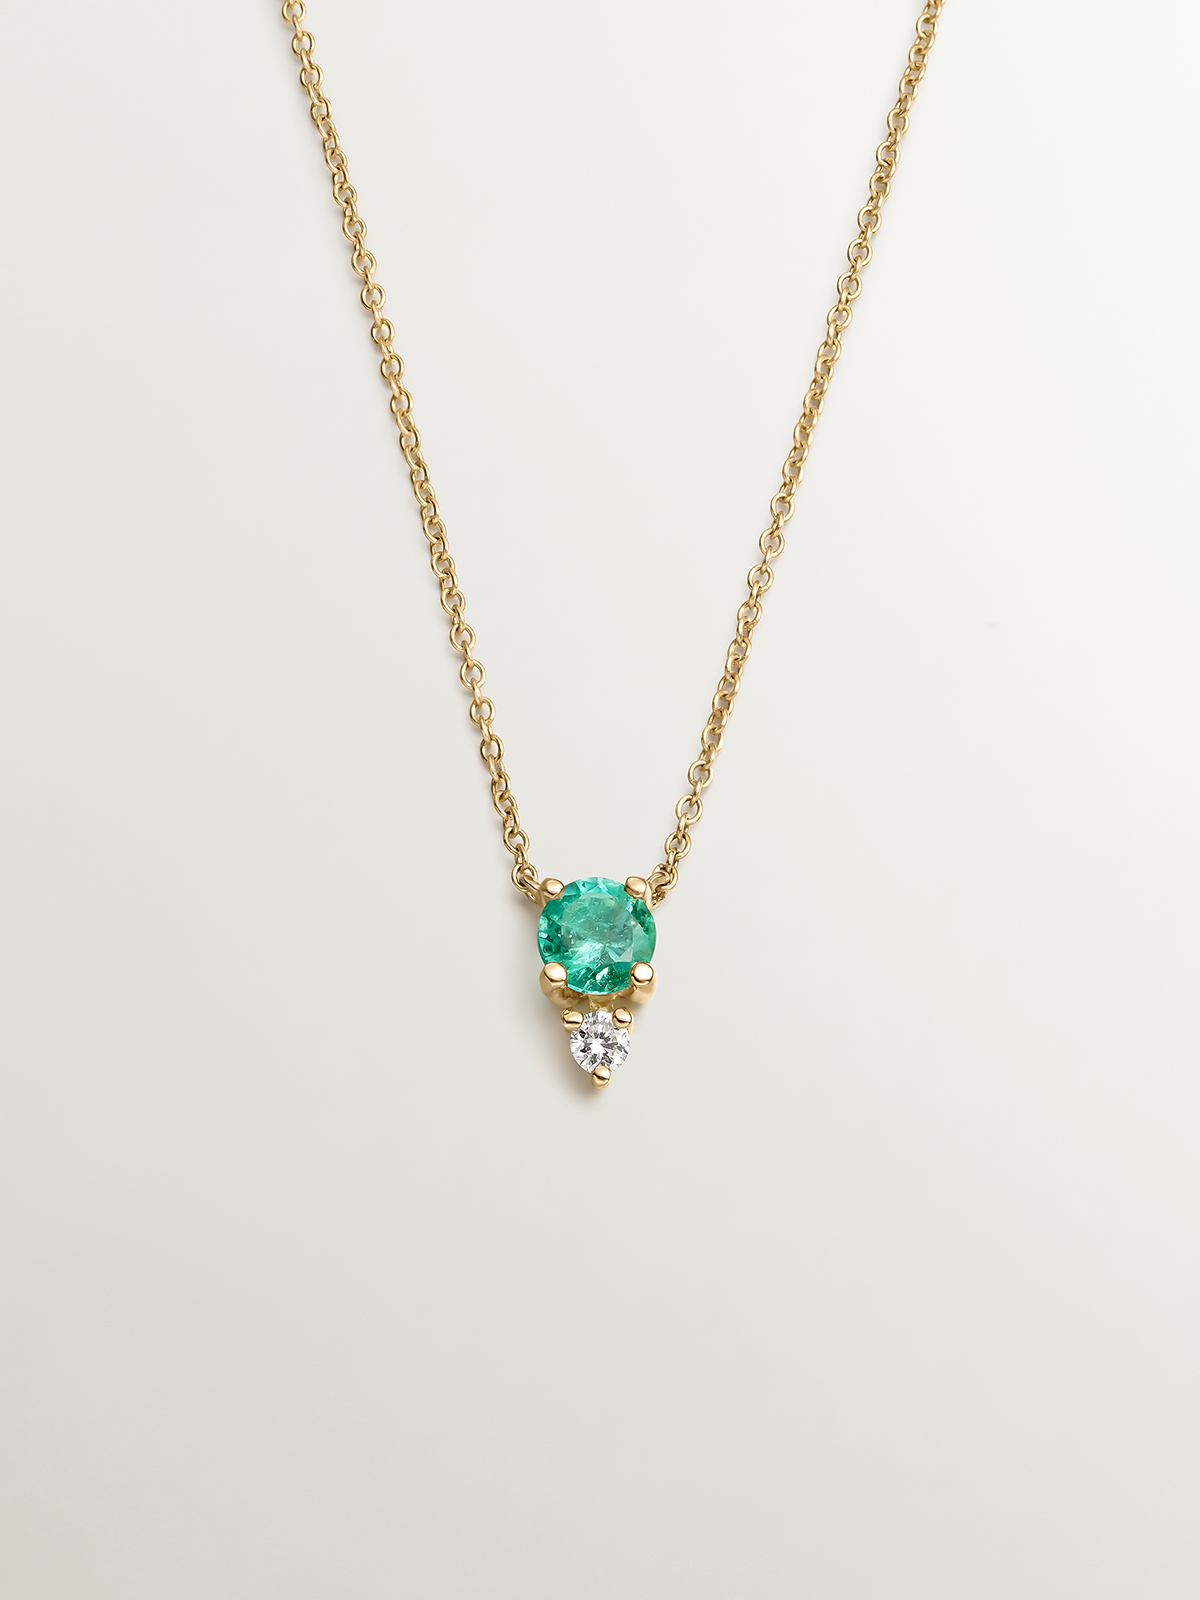 9K Yellow Gold Pendant with Emerald and Diamond